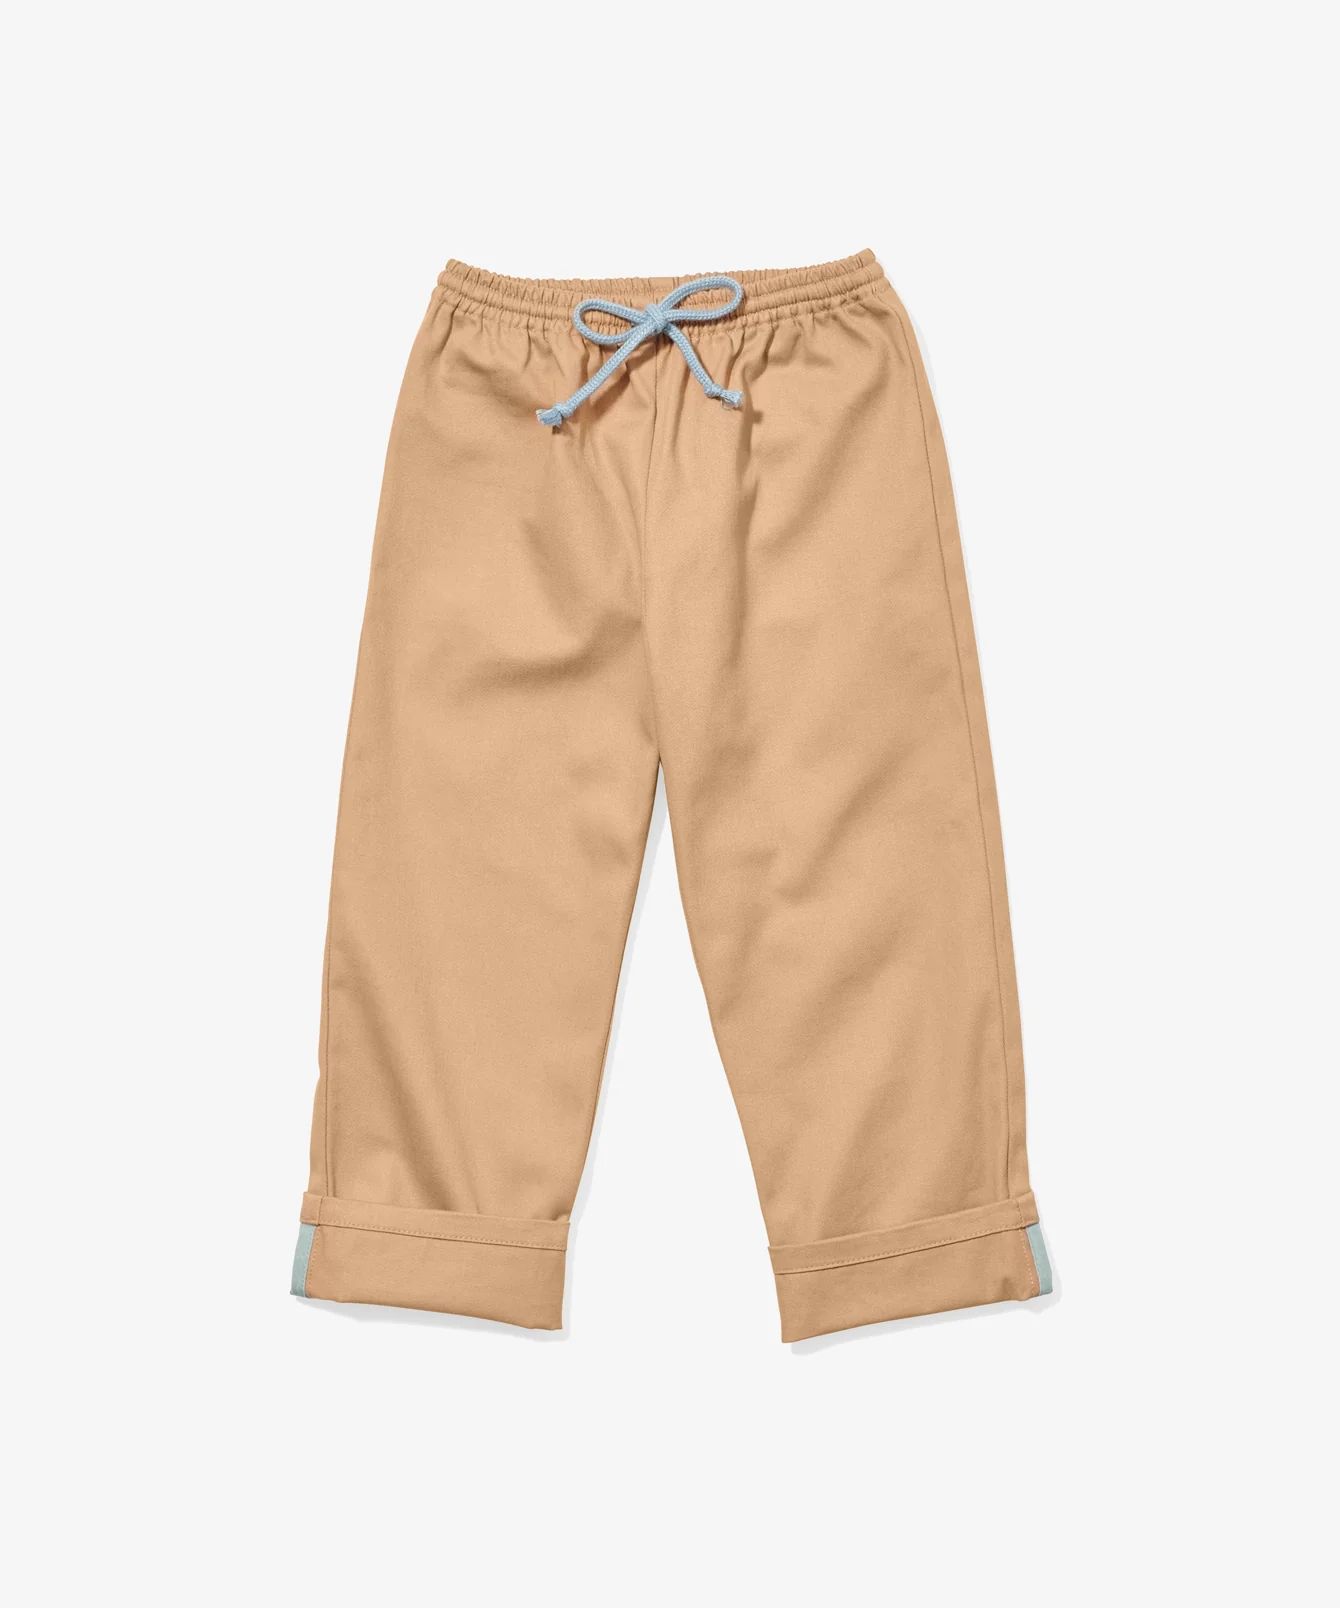 Tan Child's Pant with Drawcord Waist | Oso & Me | Oso & Me